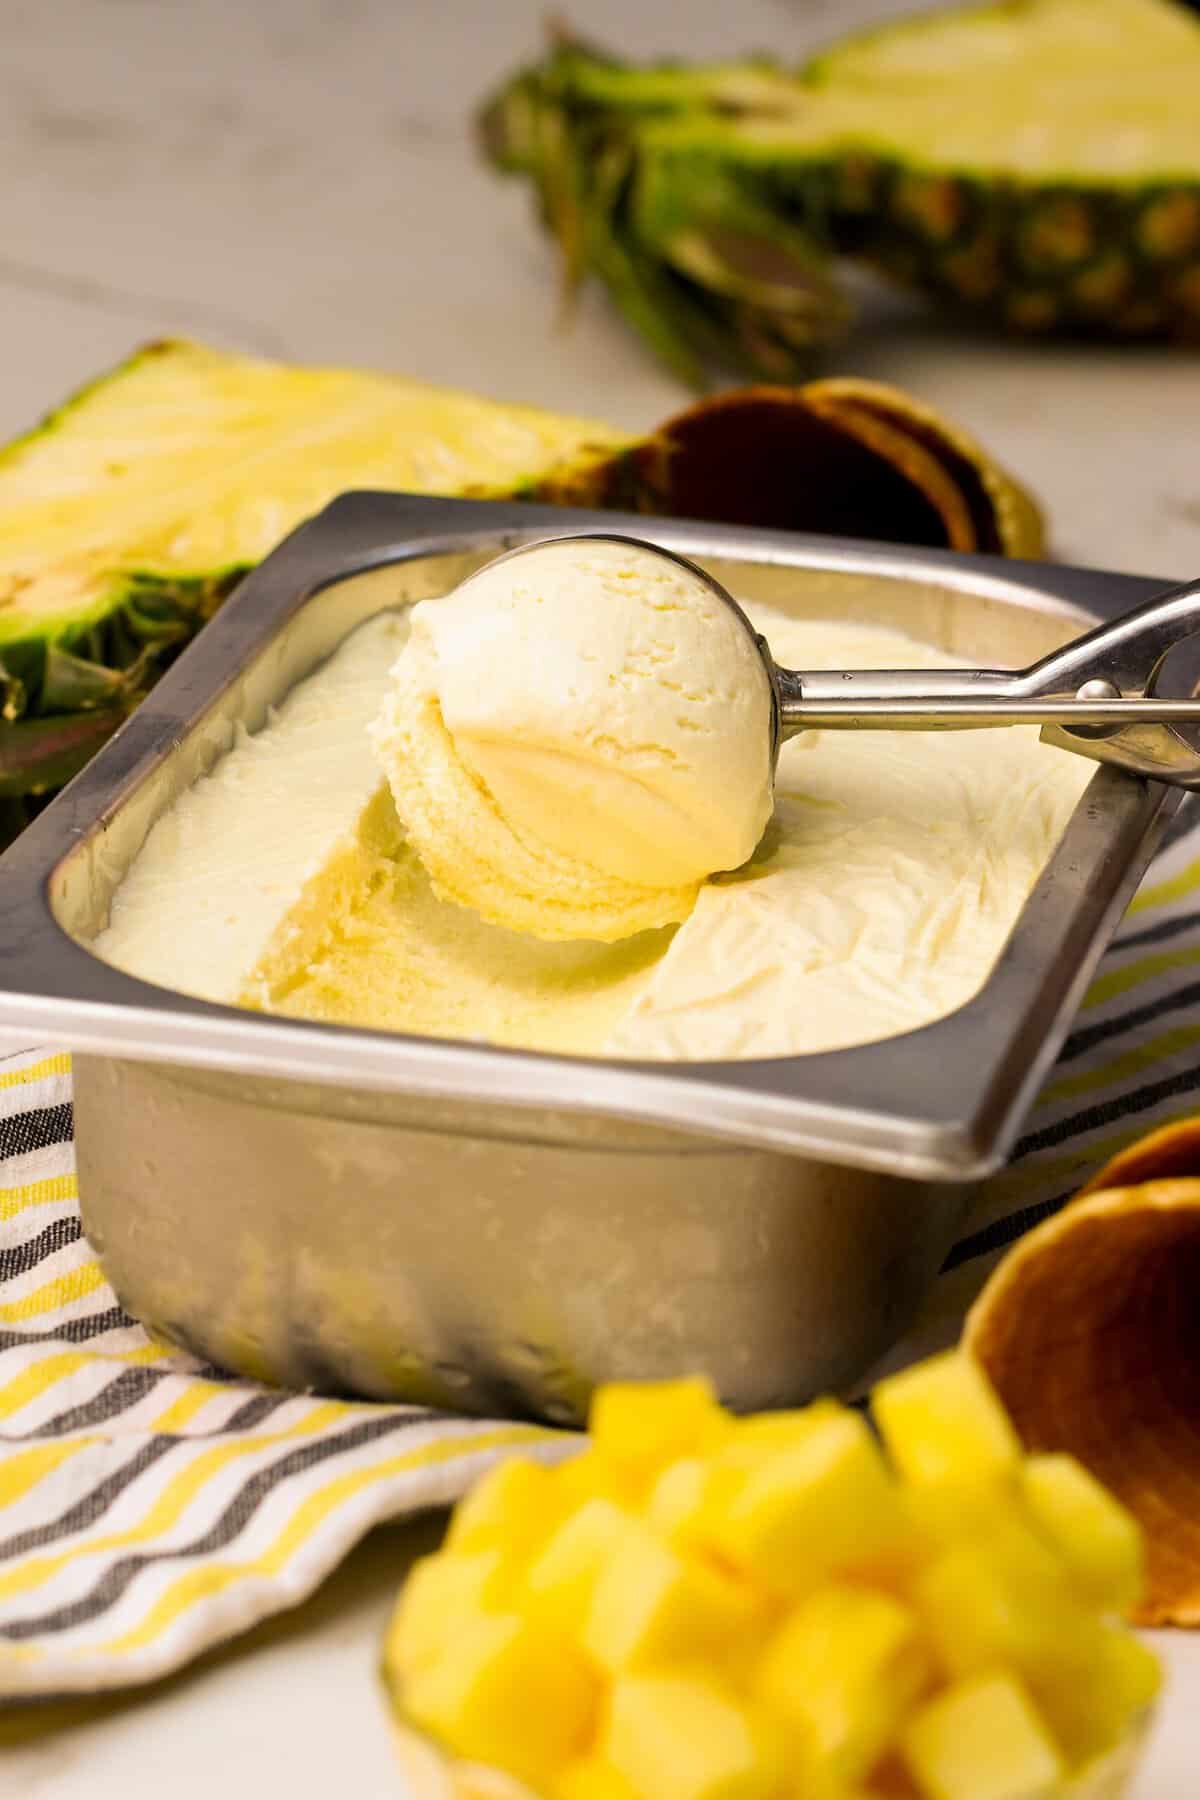 Serving up a scoop of decadent no-churn pineapple ice cream